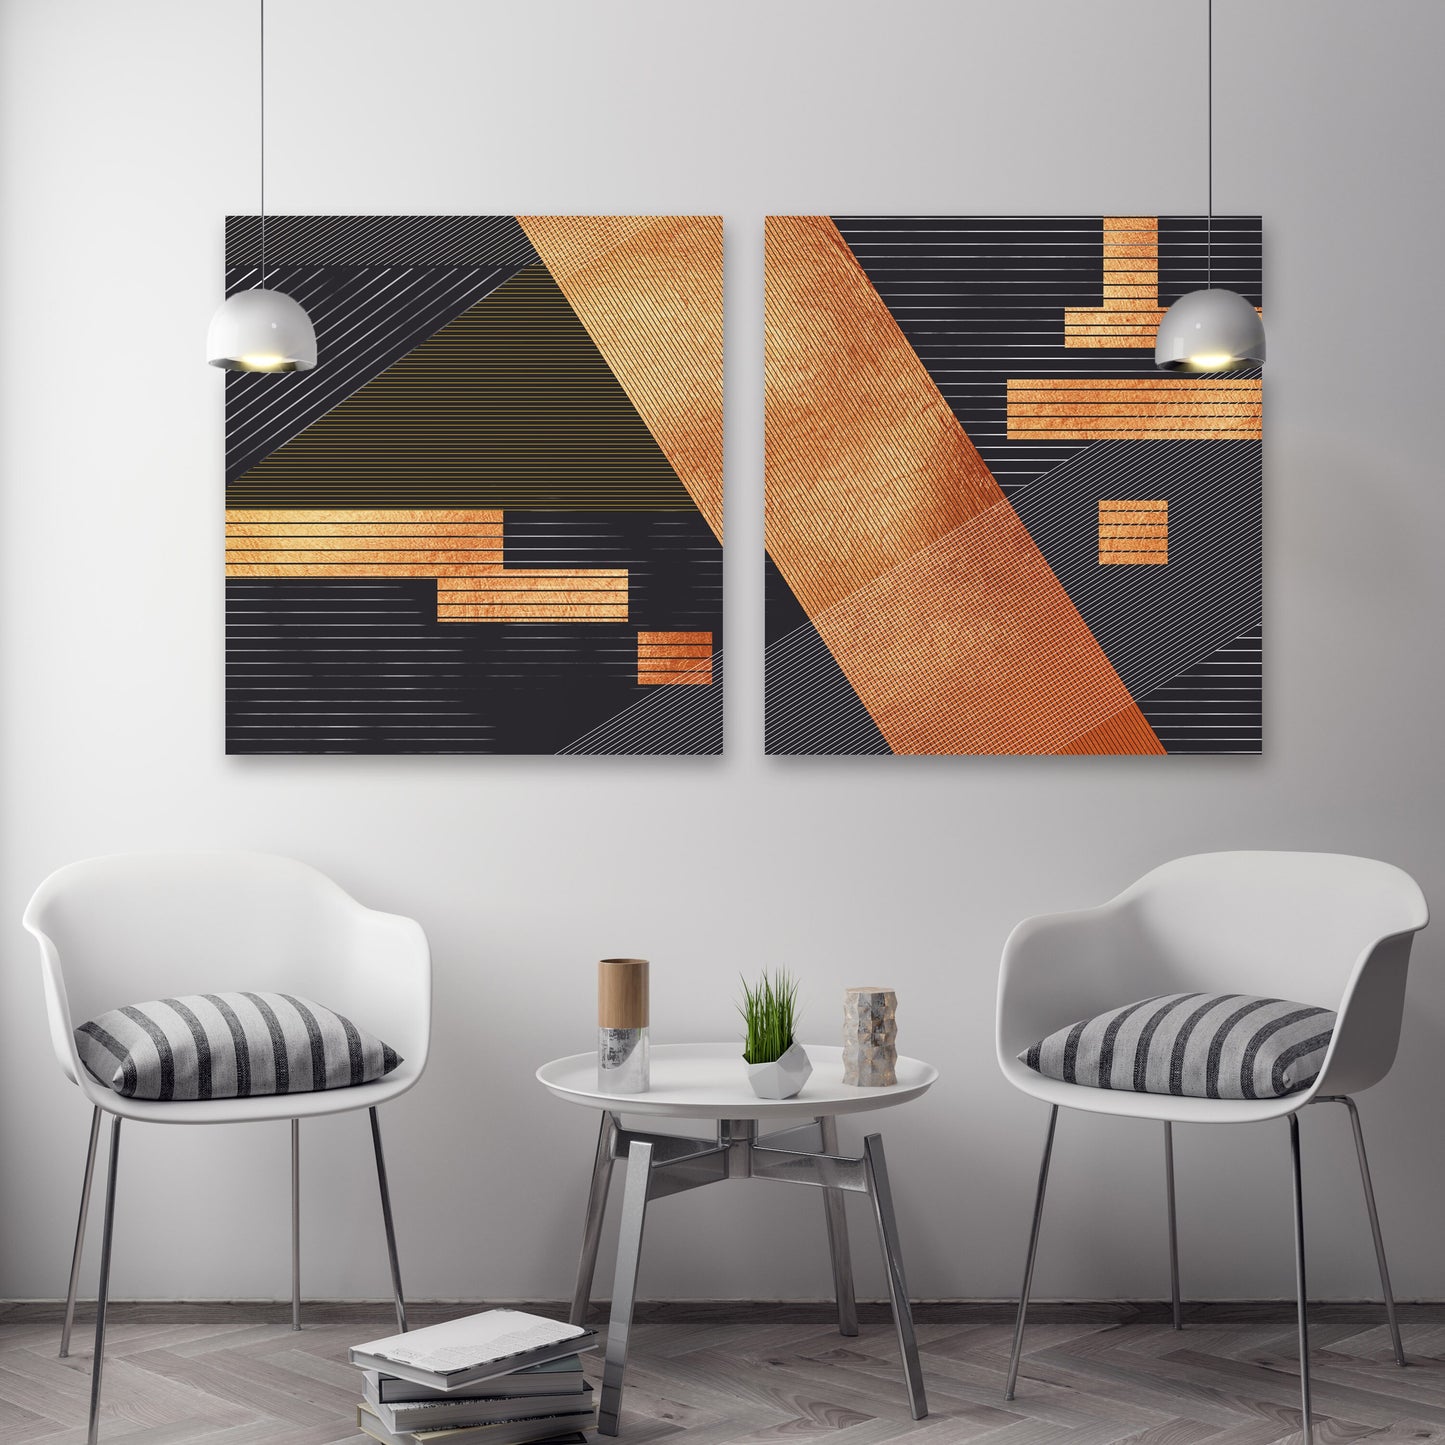 Multi piece abstract canvas wall decor, extra large trendy wall art, set of three geometric modern abstract housewarming prints for gift